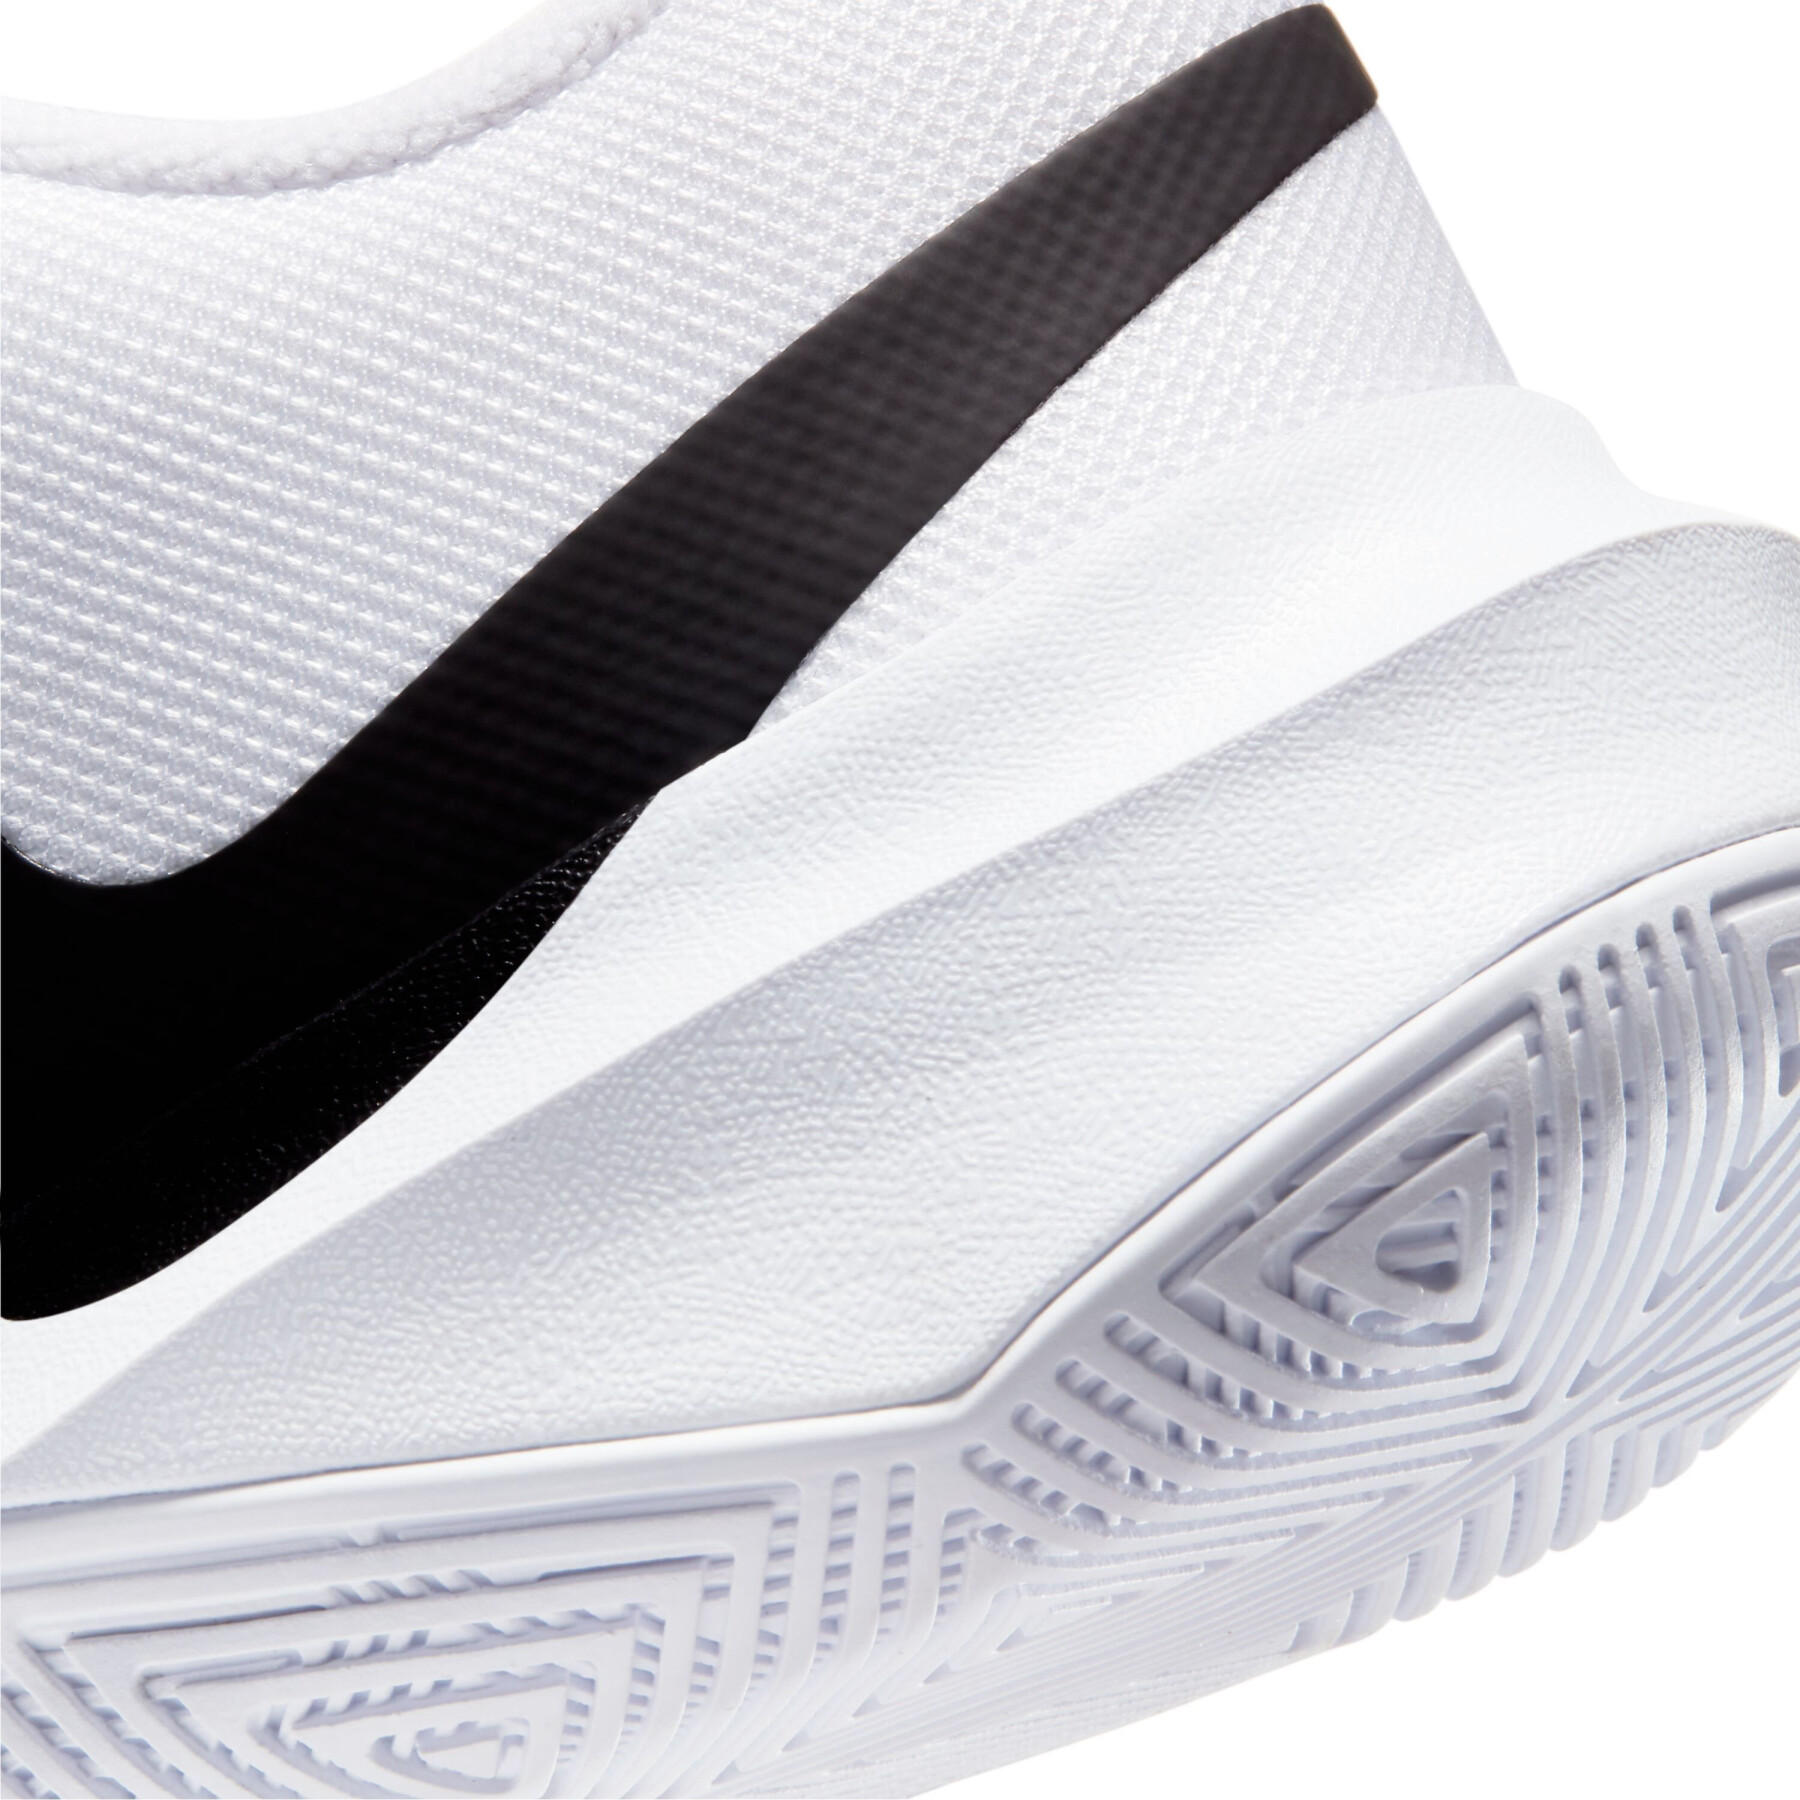 Chaussures Femme Nike Hyperspeed Court